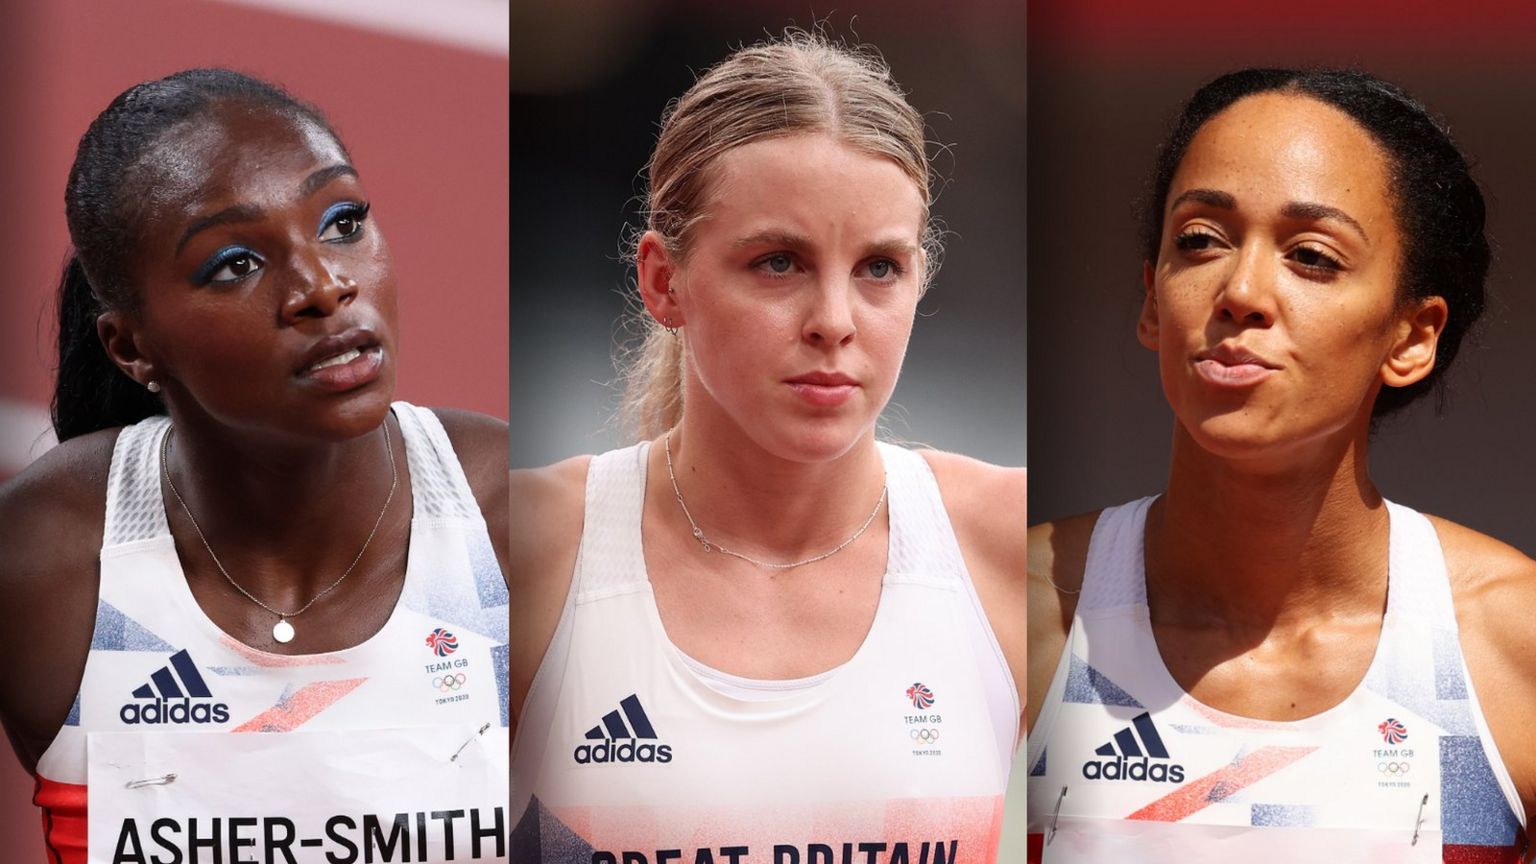 World Athletics Championships commentators: Who is on the panel